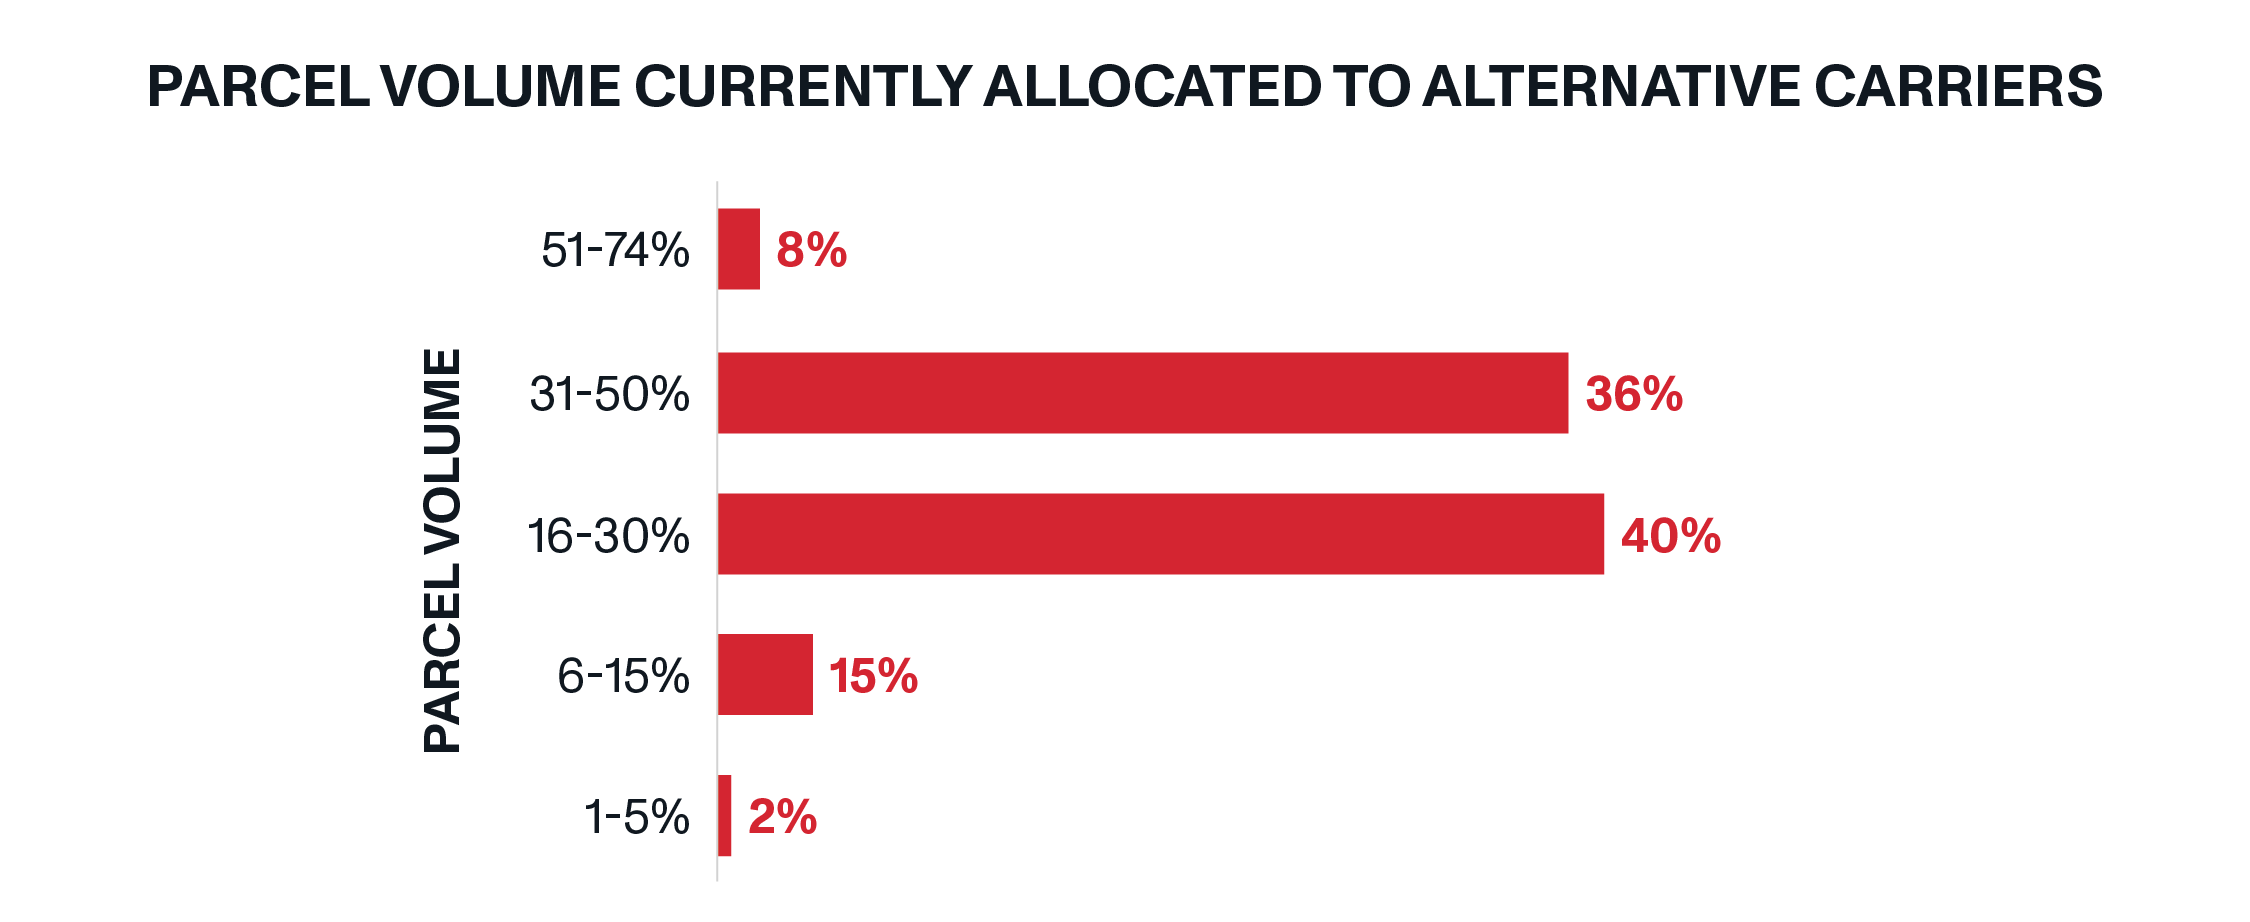 Parcel Volume Allocated to Alternative Carriers | Current Use of Alternative Carriers | OnTrac Carrier Diversity | How Retailers Are Leveraging Alternative Carriers to Meet Consumer Expectations